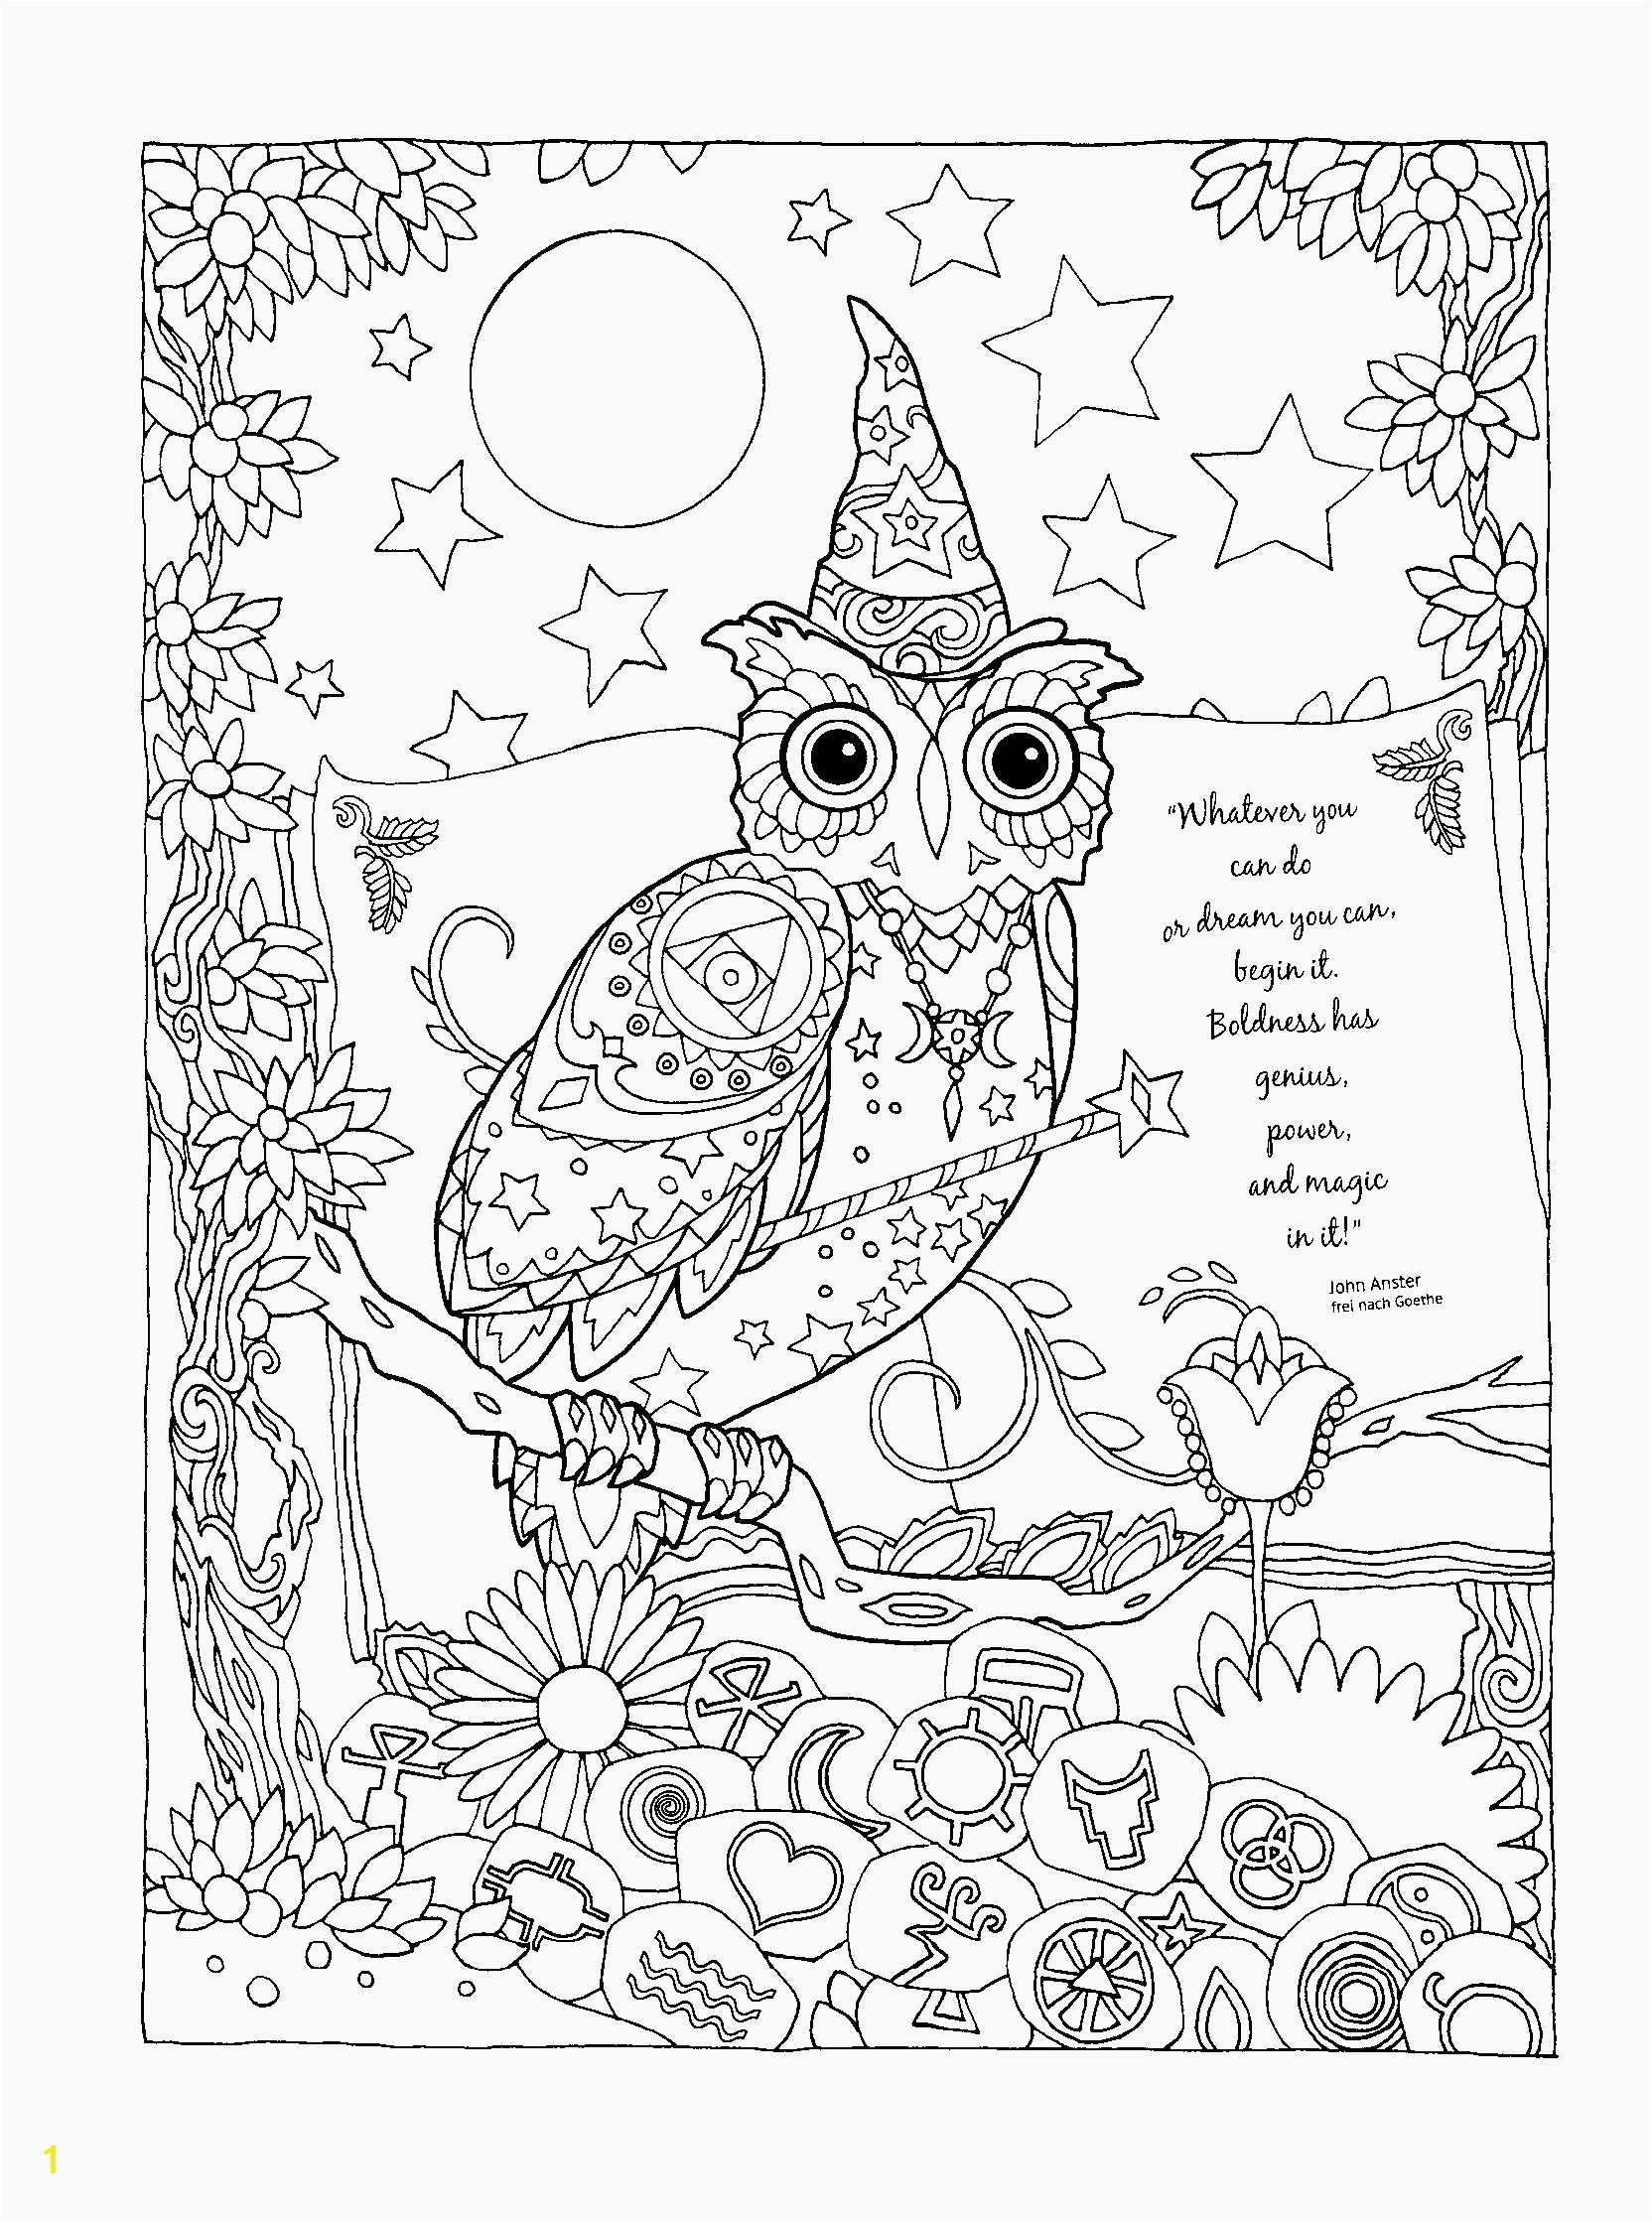 Different Shapes Coloring Pages 15 Fresh Different Shapes Coloring Pages Stock